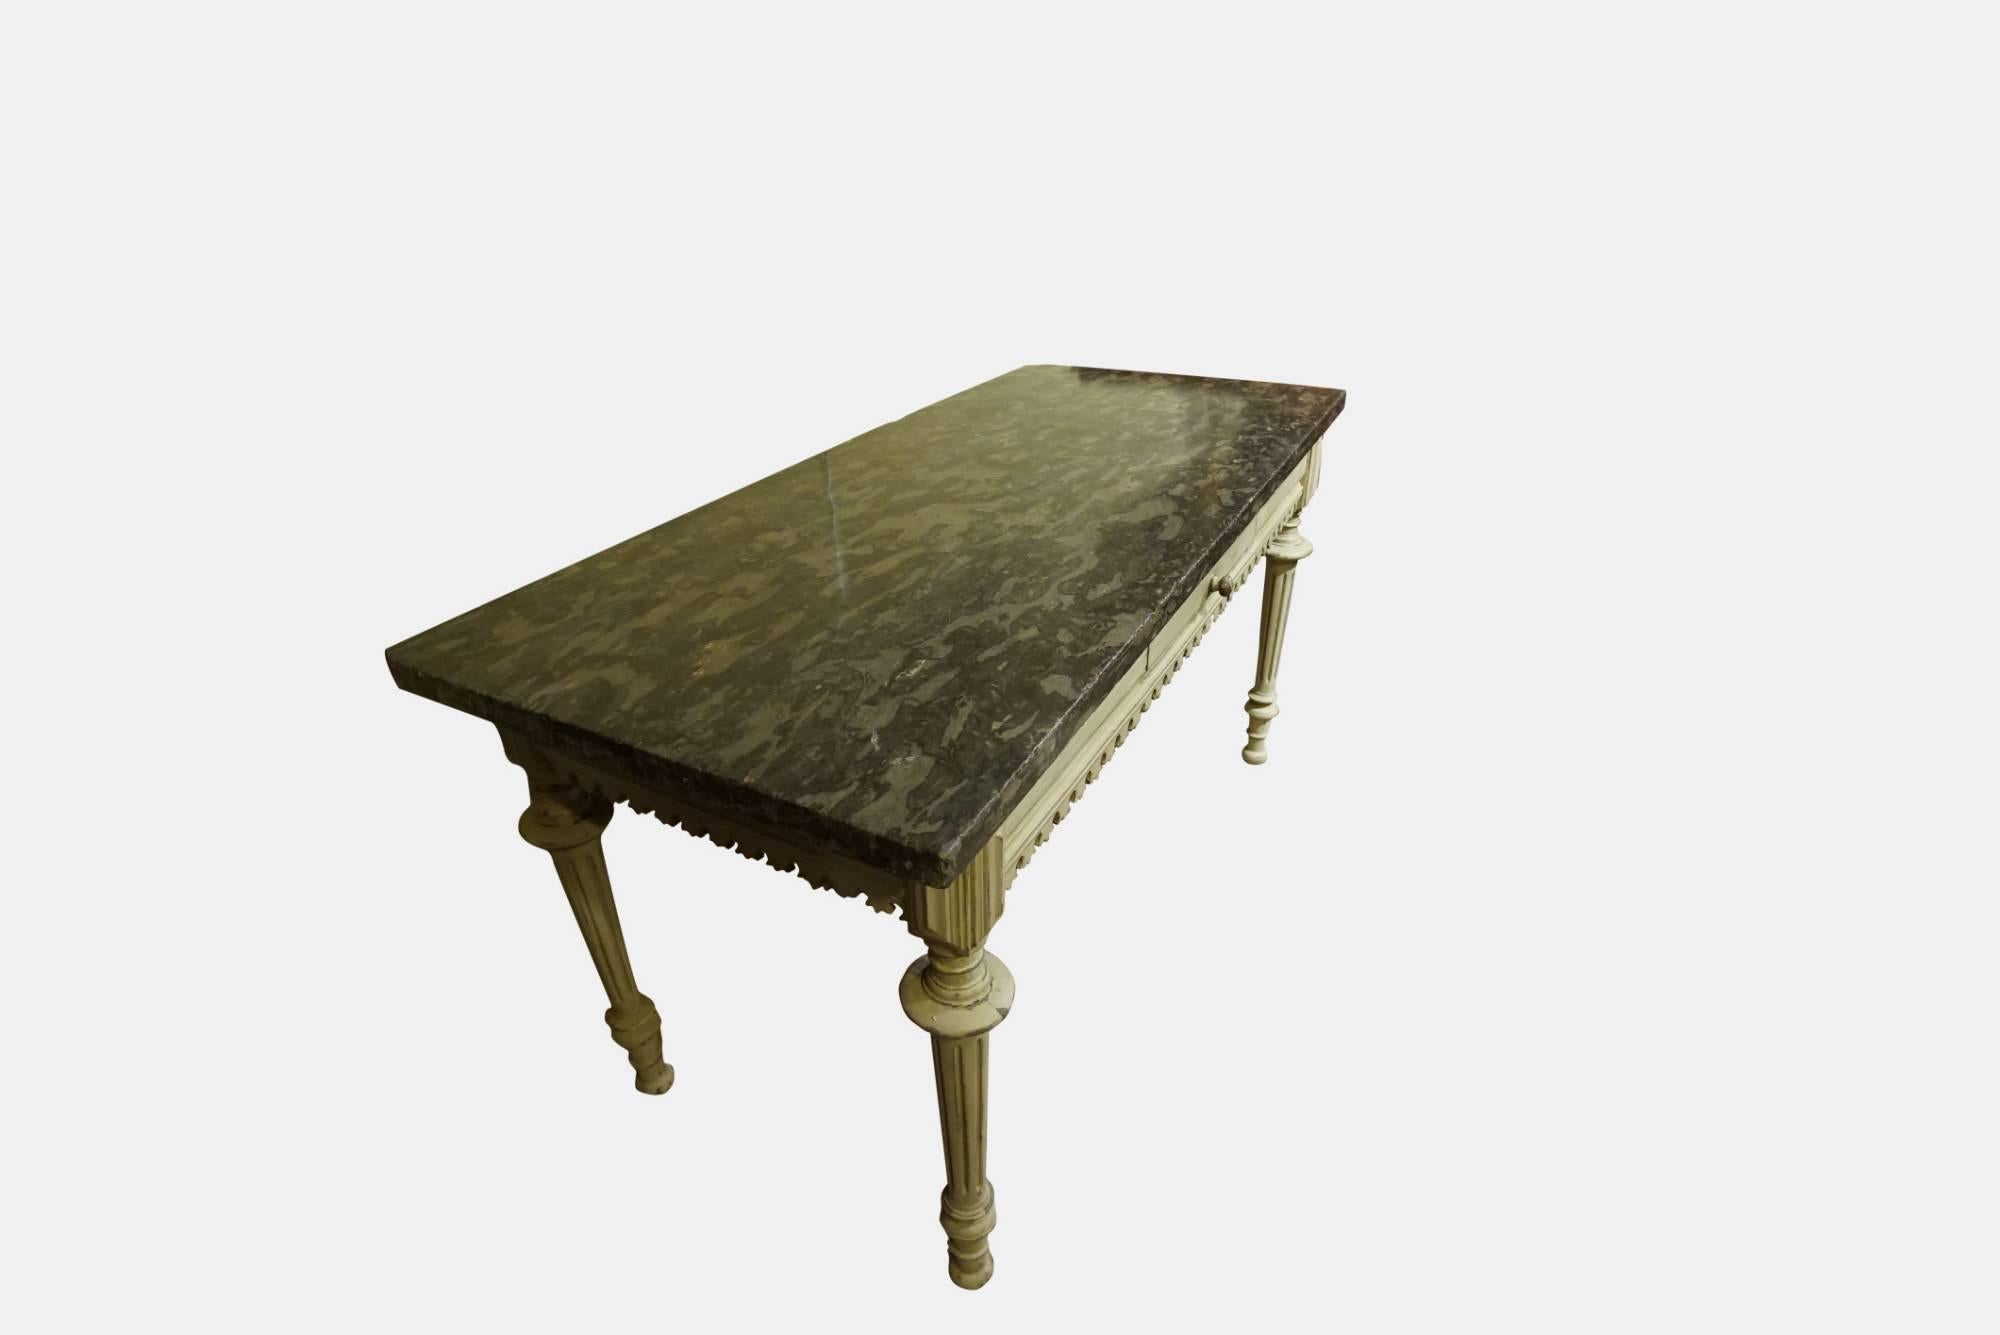 A 19thcentury green/grey marble-top serving table with painted base and single drawer on turned legs. The marble probably earlier. Measures: 4cm thick.